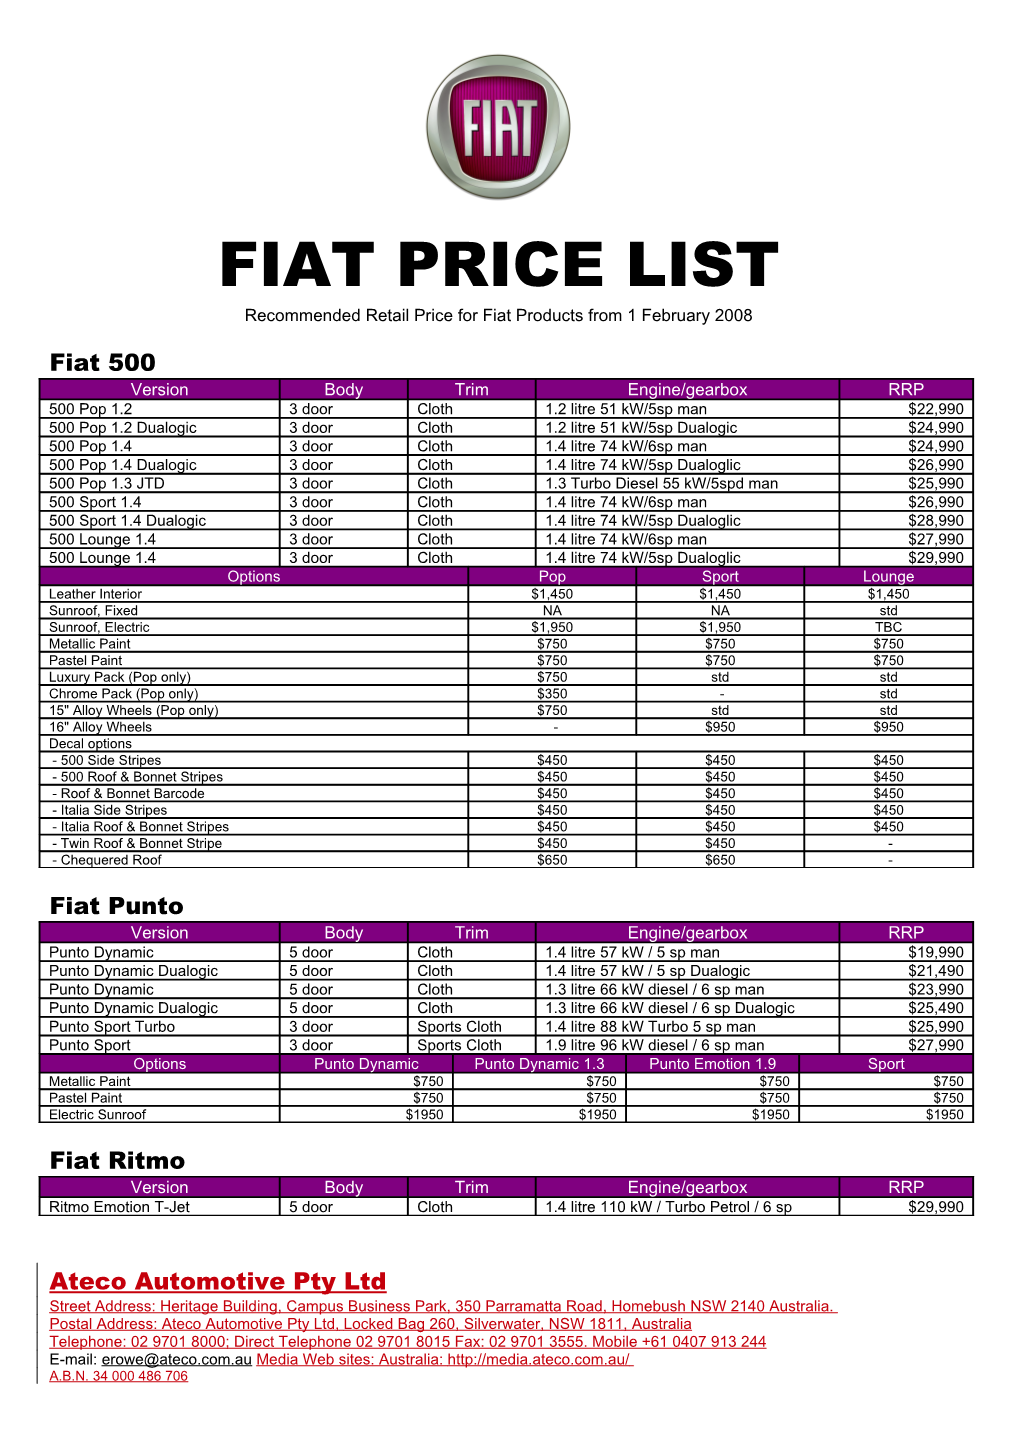 Recommended Retail Price for Fiat Products from 1 February 2008